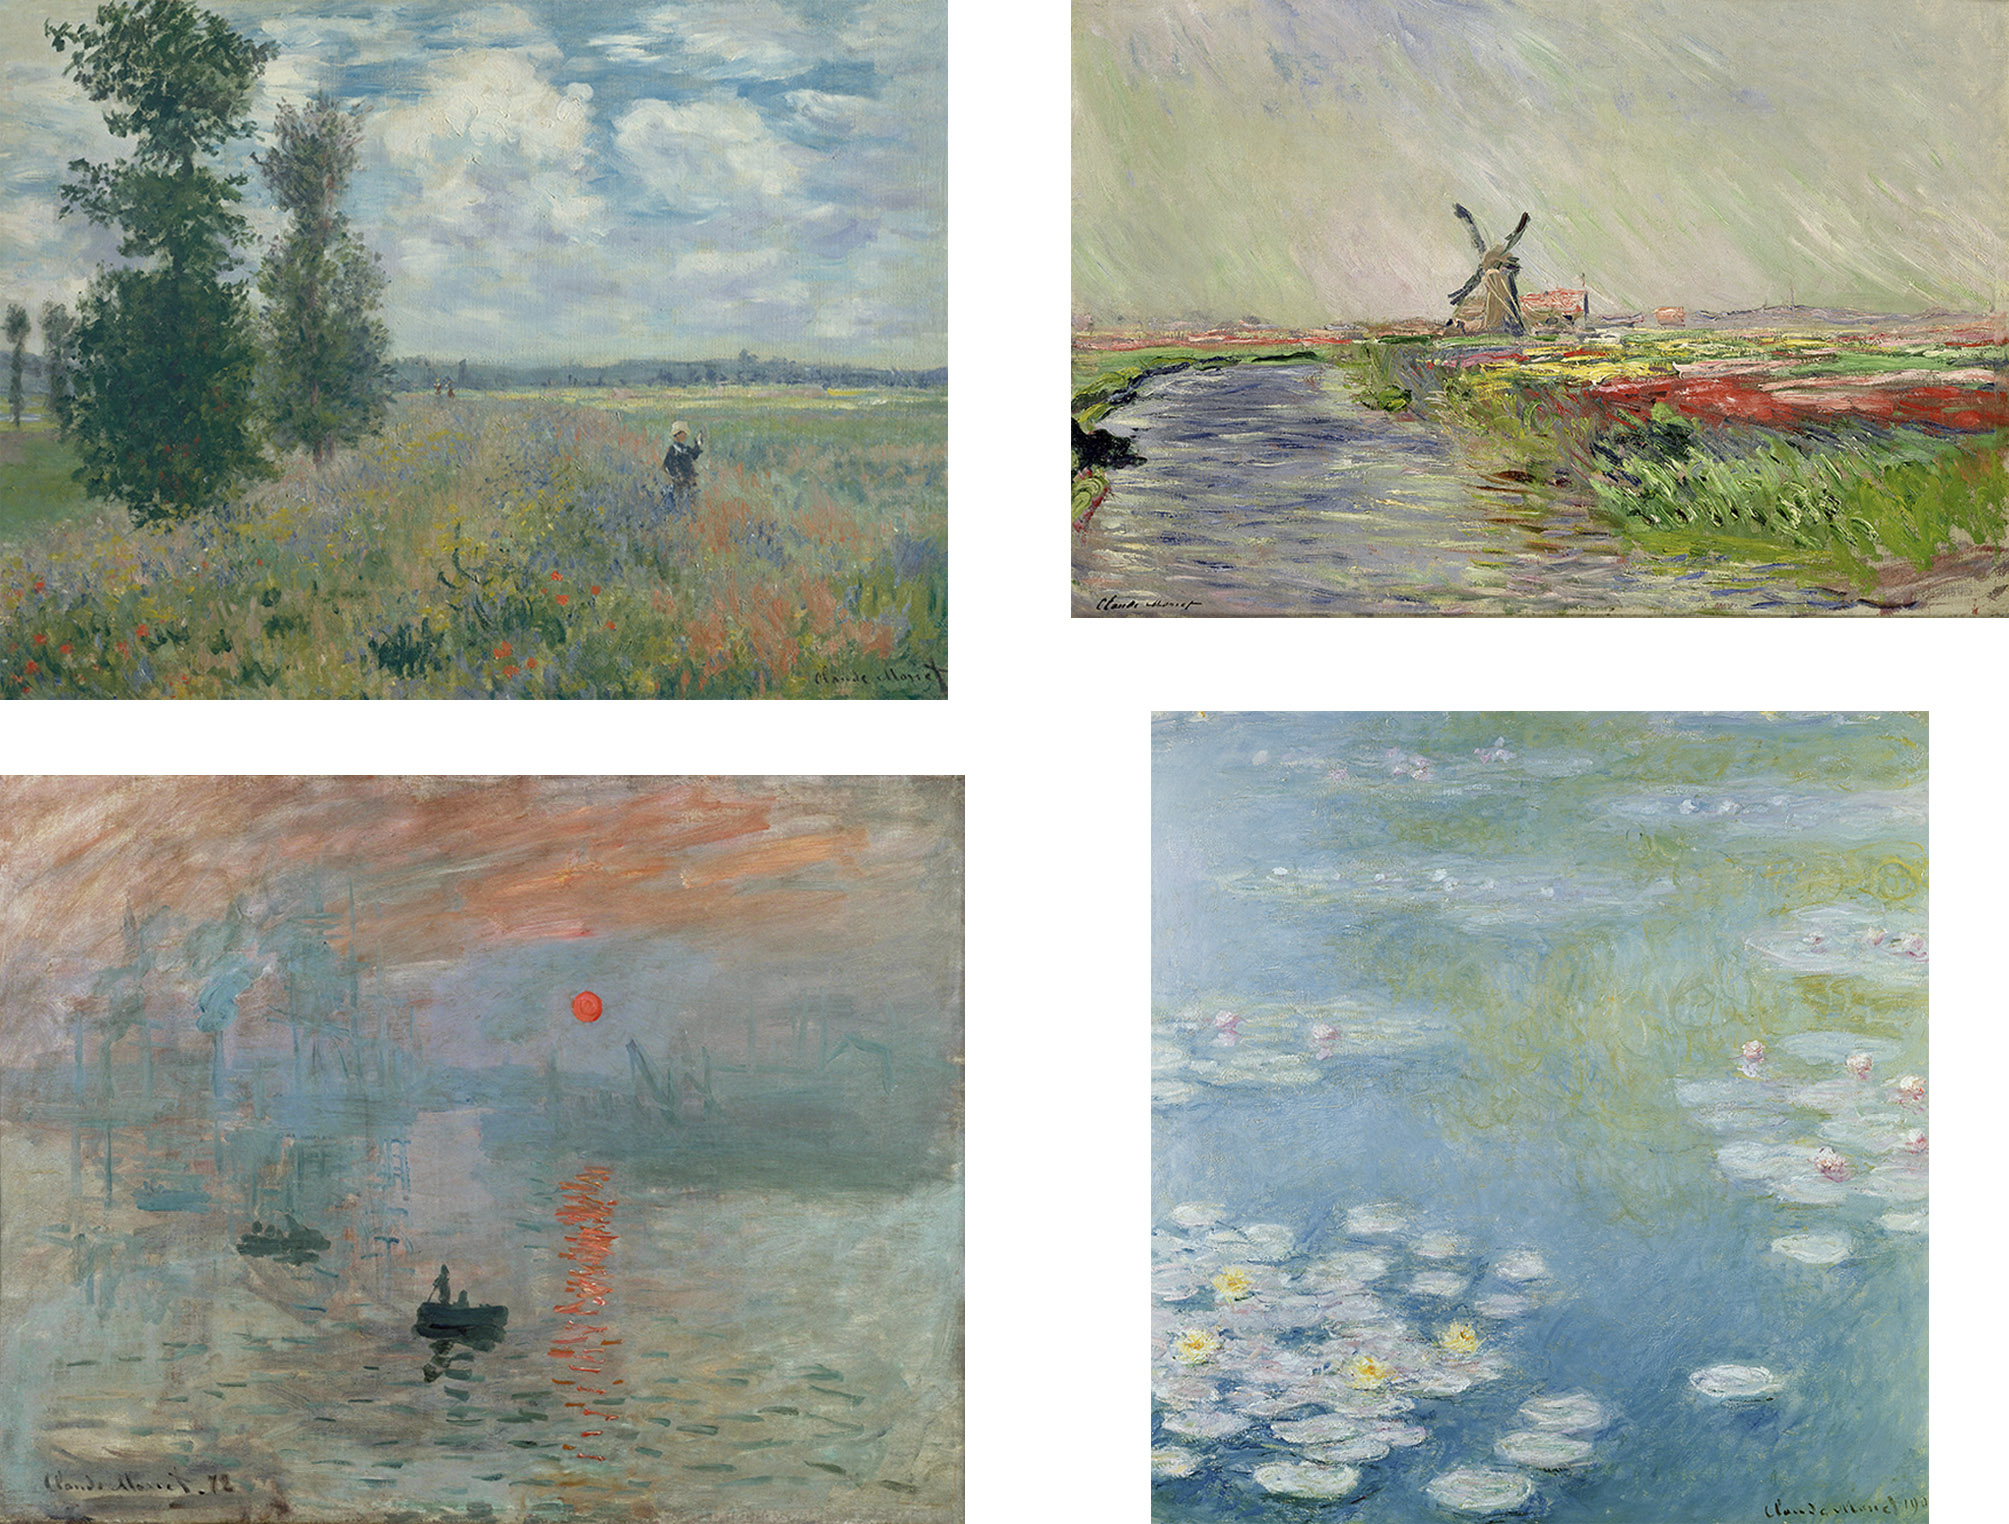 Montage of Monet images used by Pond (a beauty products company) on their face masks packaging